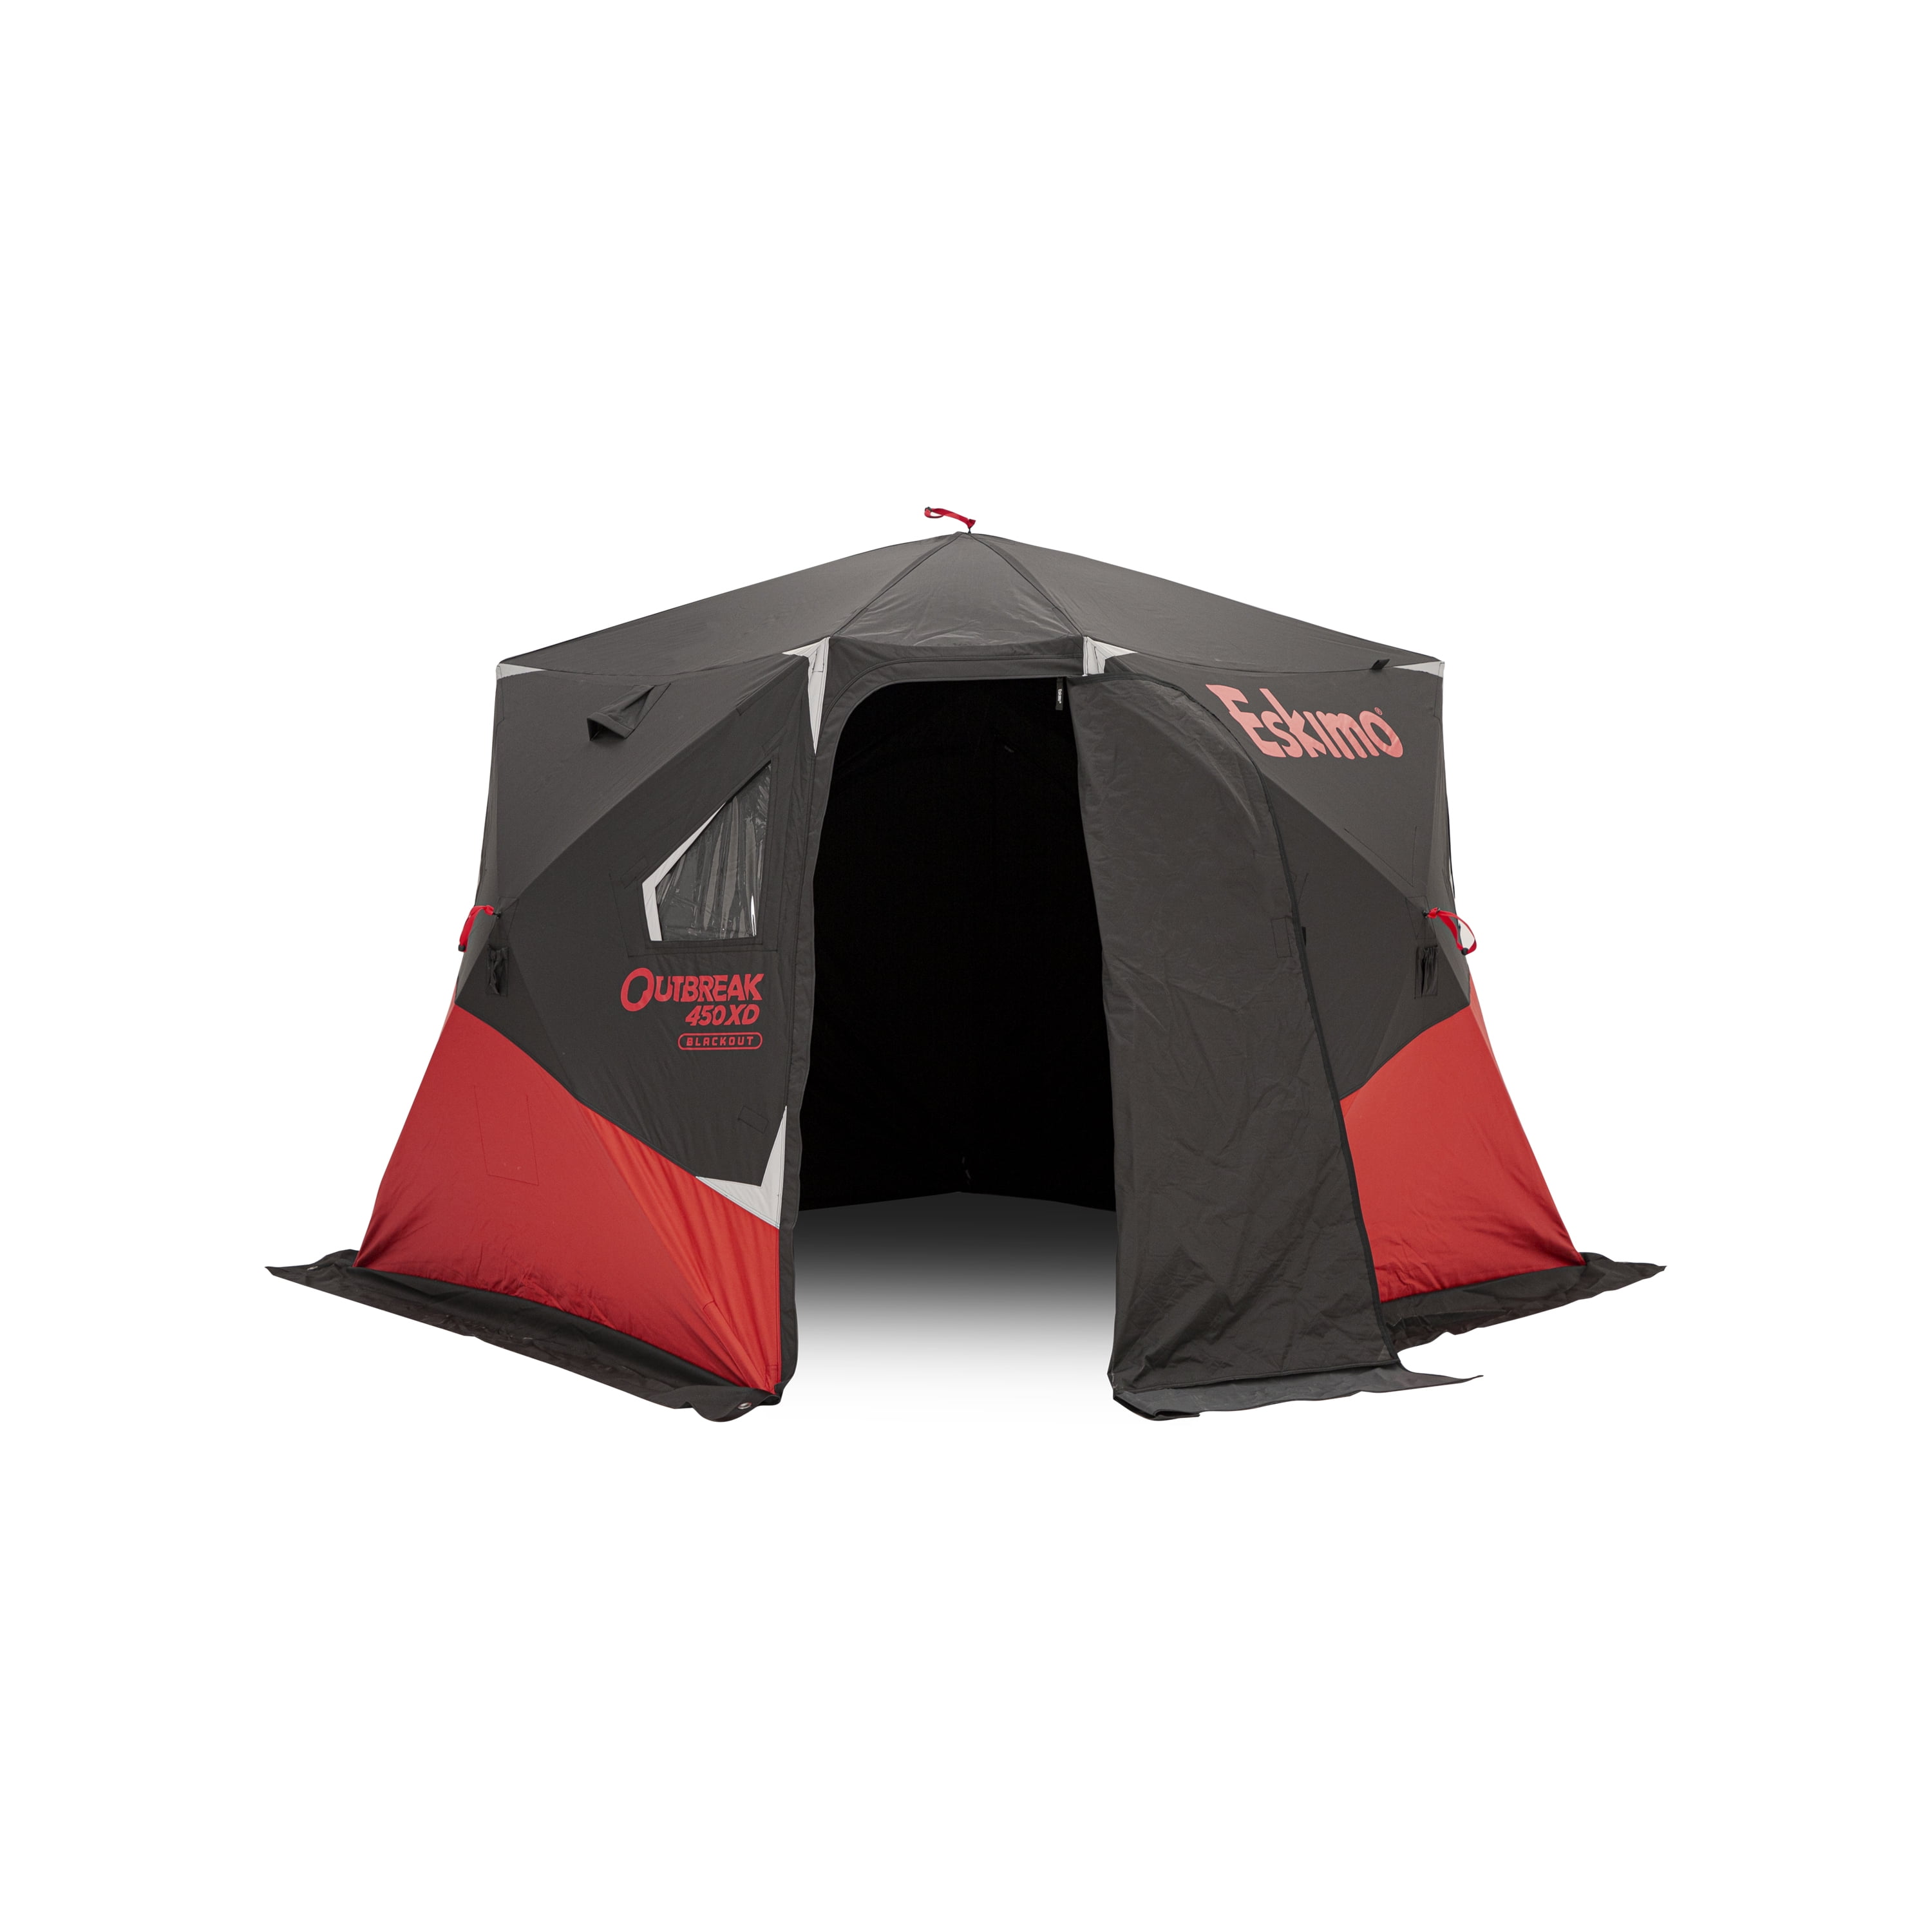 Eskimo Outbreak™ 450XD Blackout, Pop-Up Portable Shelter, Insulated, Black, 4-5 Person, 40450B